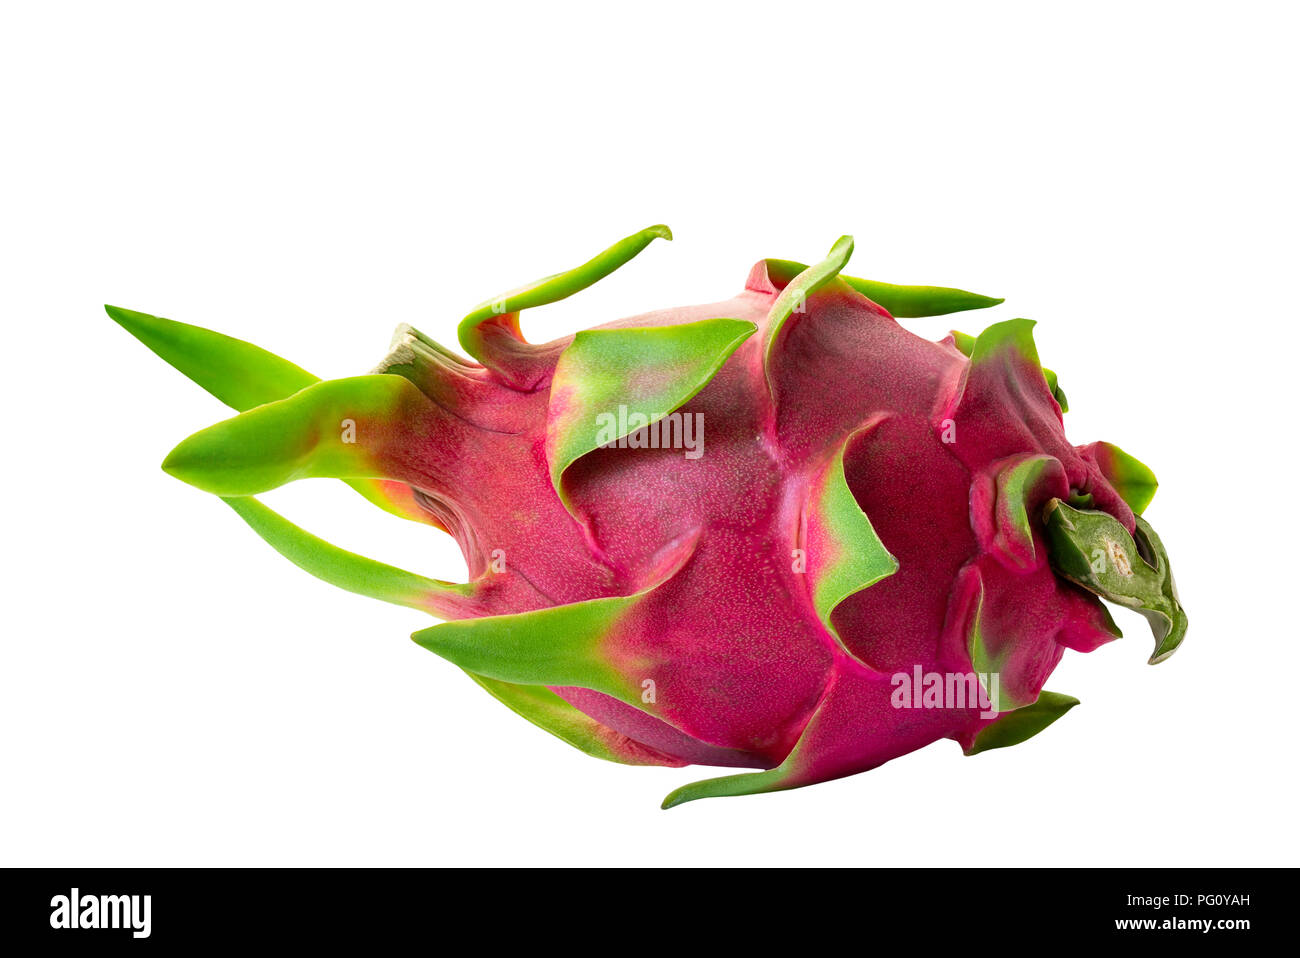 Pitaya or dragon fruit isolated on white background (clipping path included) Stock Photo